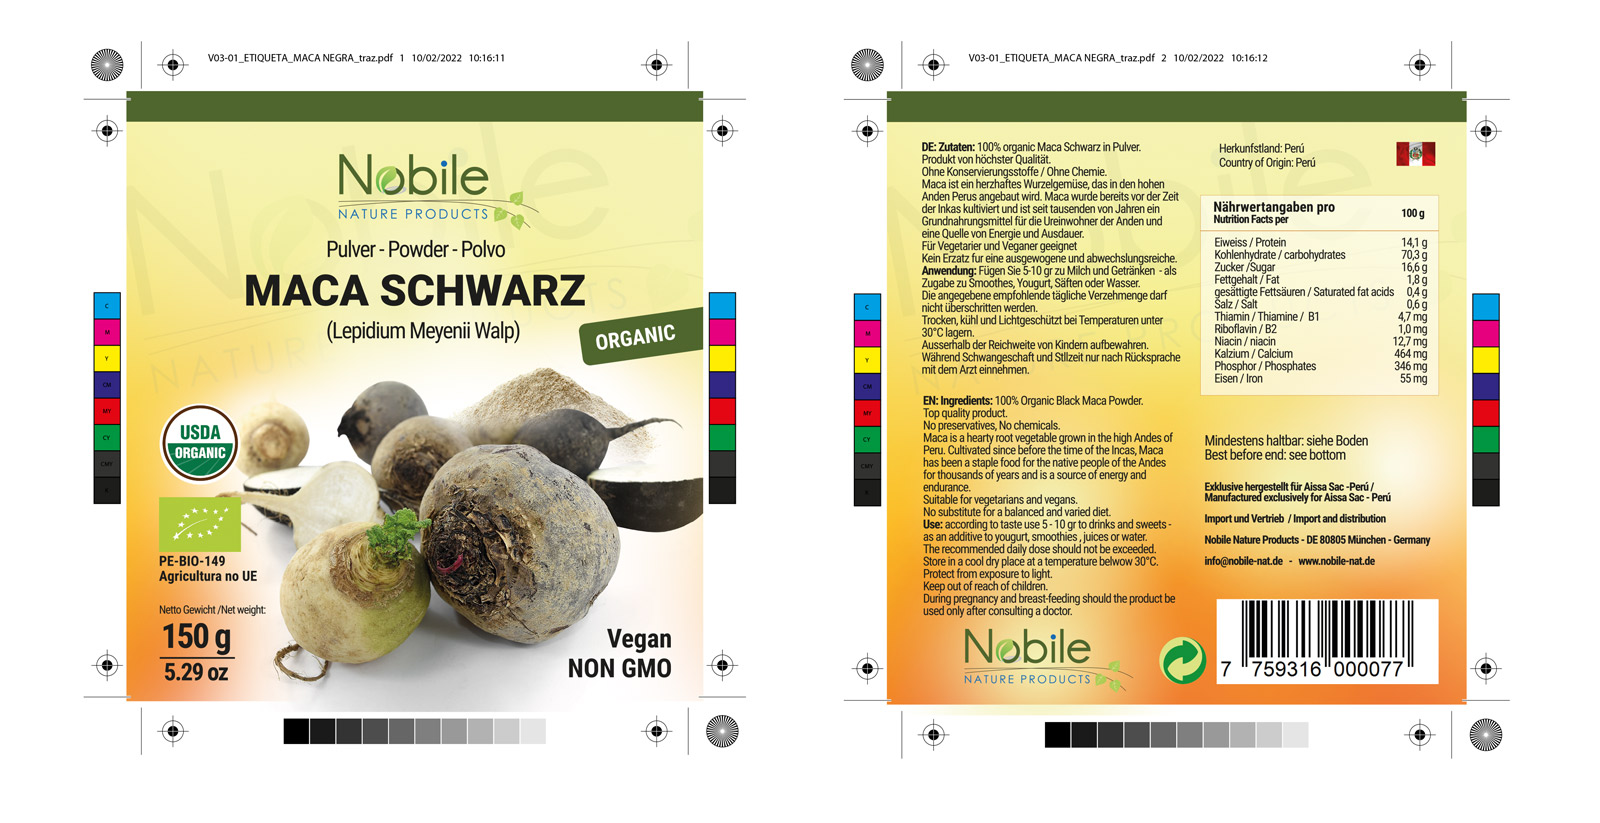 Graphic and creative design of product labels for BLACK MACA - MACA SCHWARZ from the company Nobile Nature Products in Germany